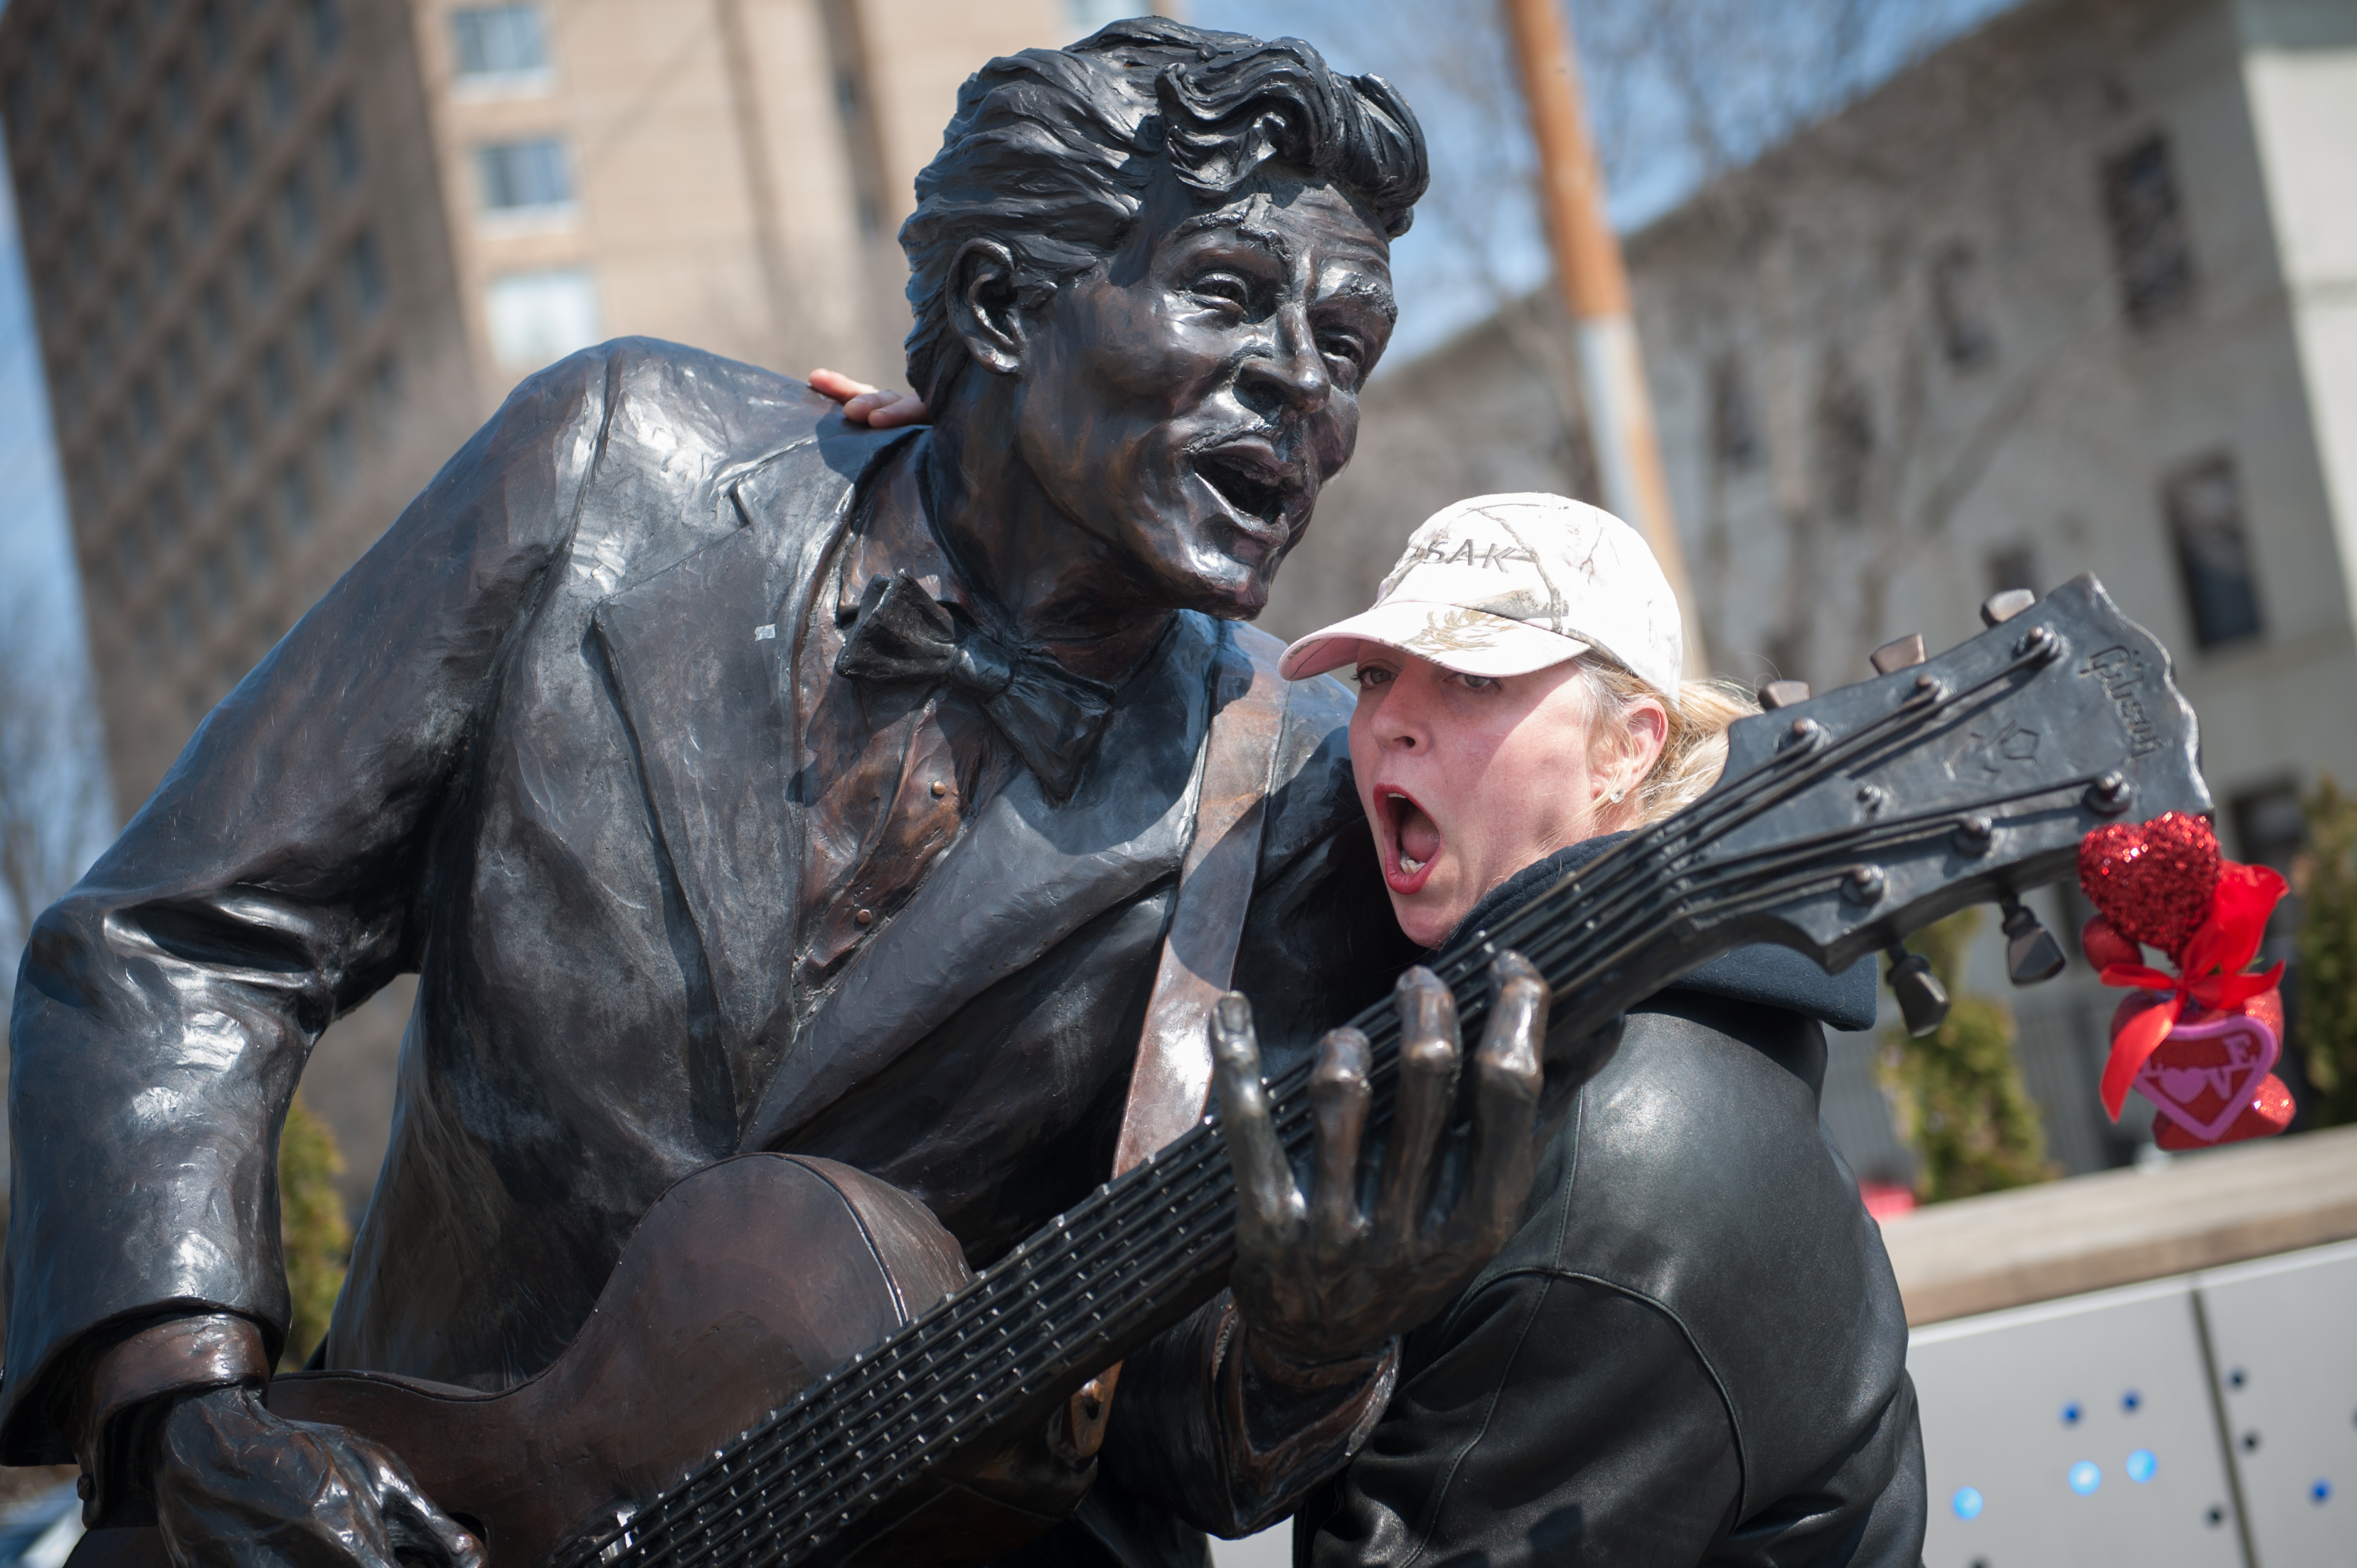  A woman poses outside the statue of Chuck Berry on March 19, 2017 in University City, Missouri. The rock 'n' roll pioneer died on Saturday at the age of 90 at his home in a suburb of St. Louis, Missouri. (Photo by Michael B. Thomas/Getty Images)